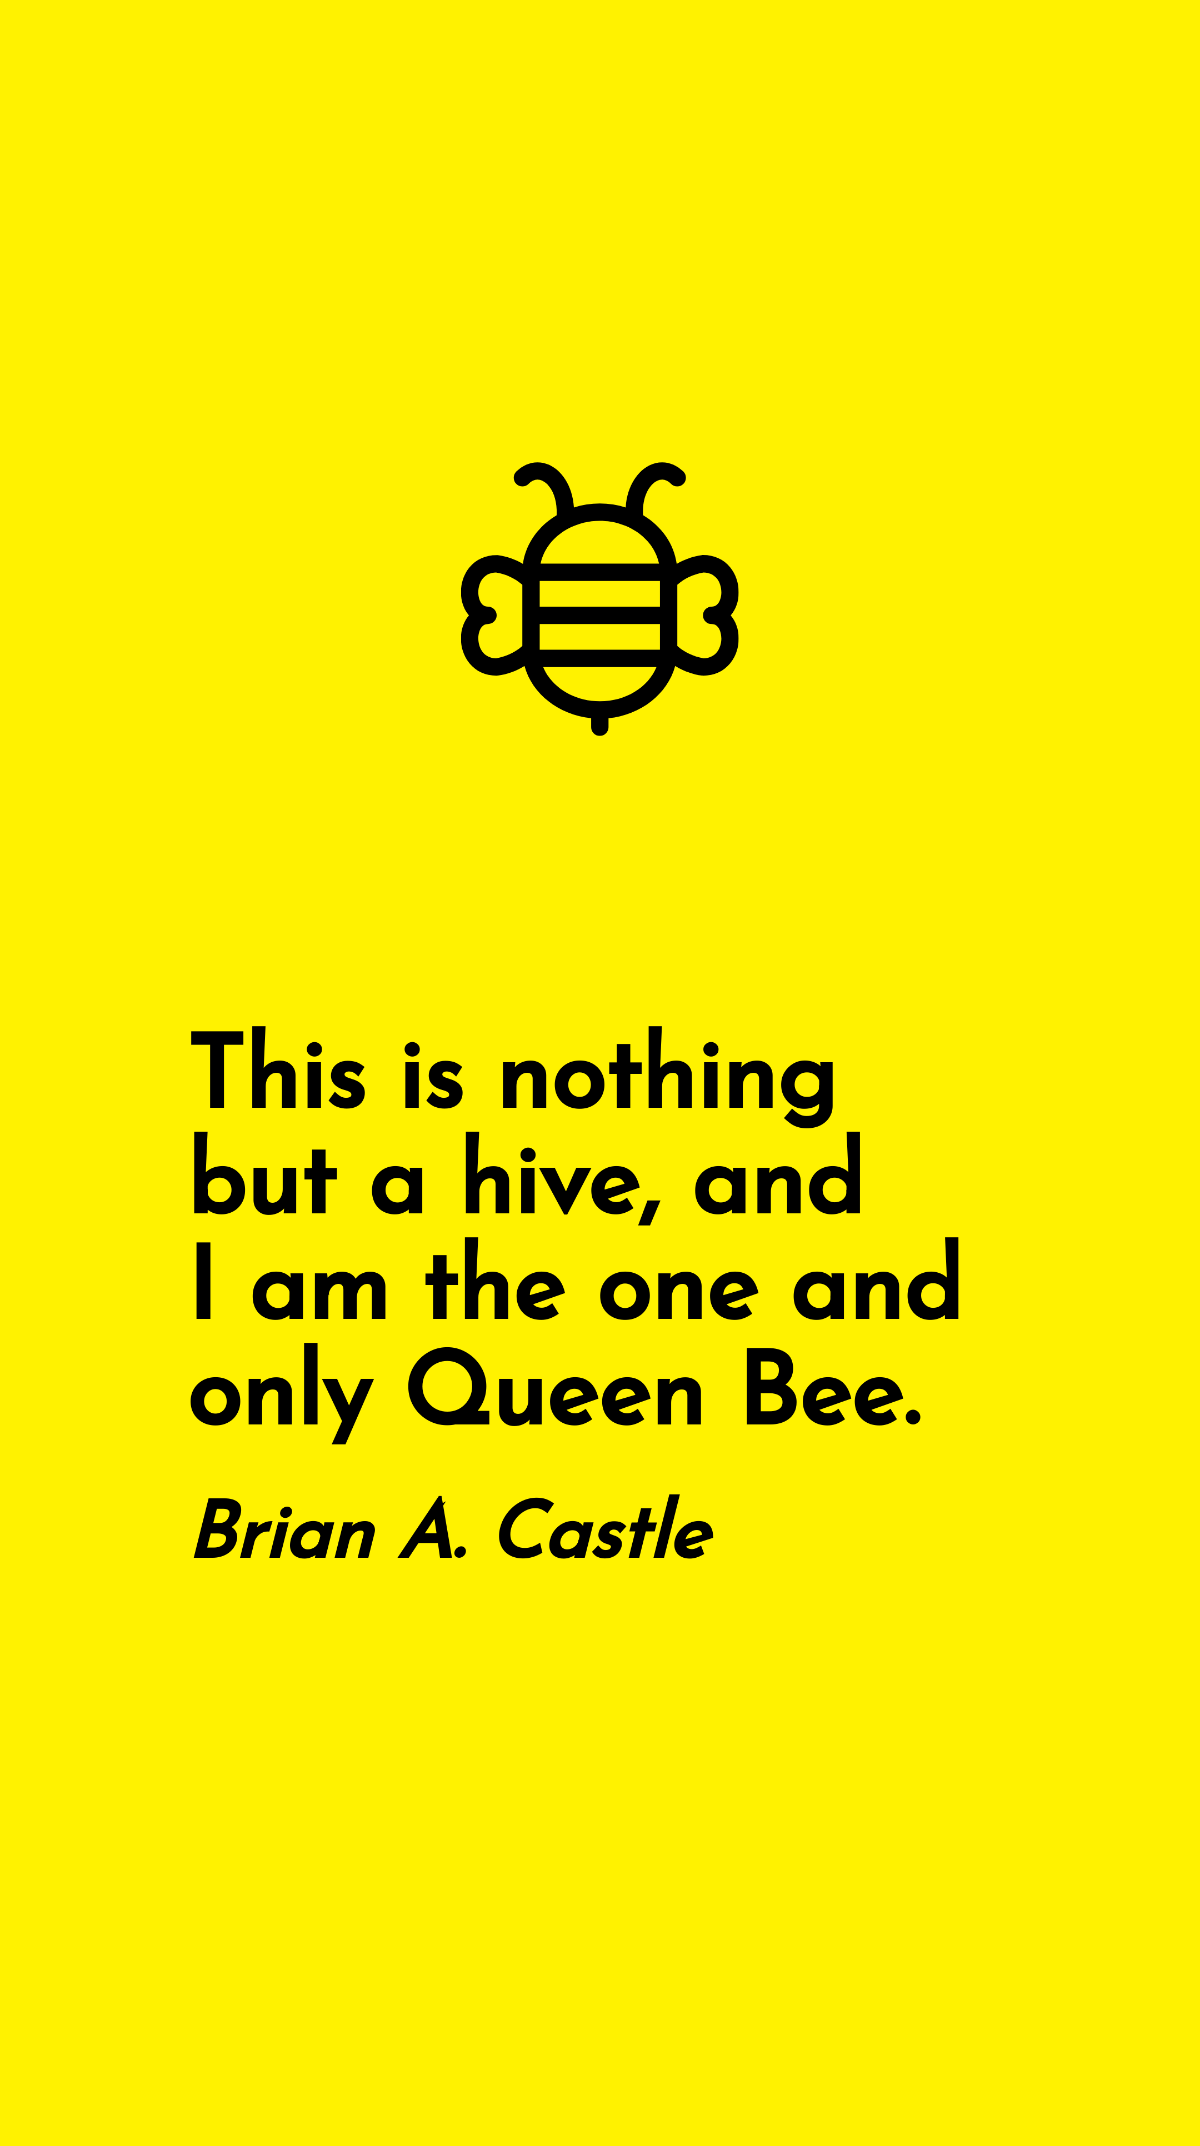 Brian A Castle - This is nothing but a hive, and I am the one and only Queen Bee.